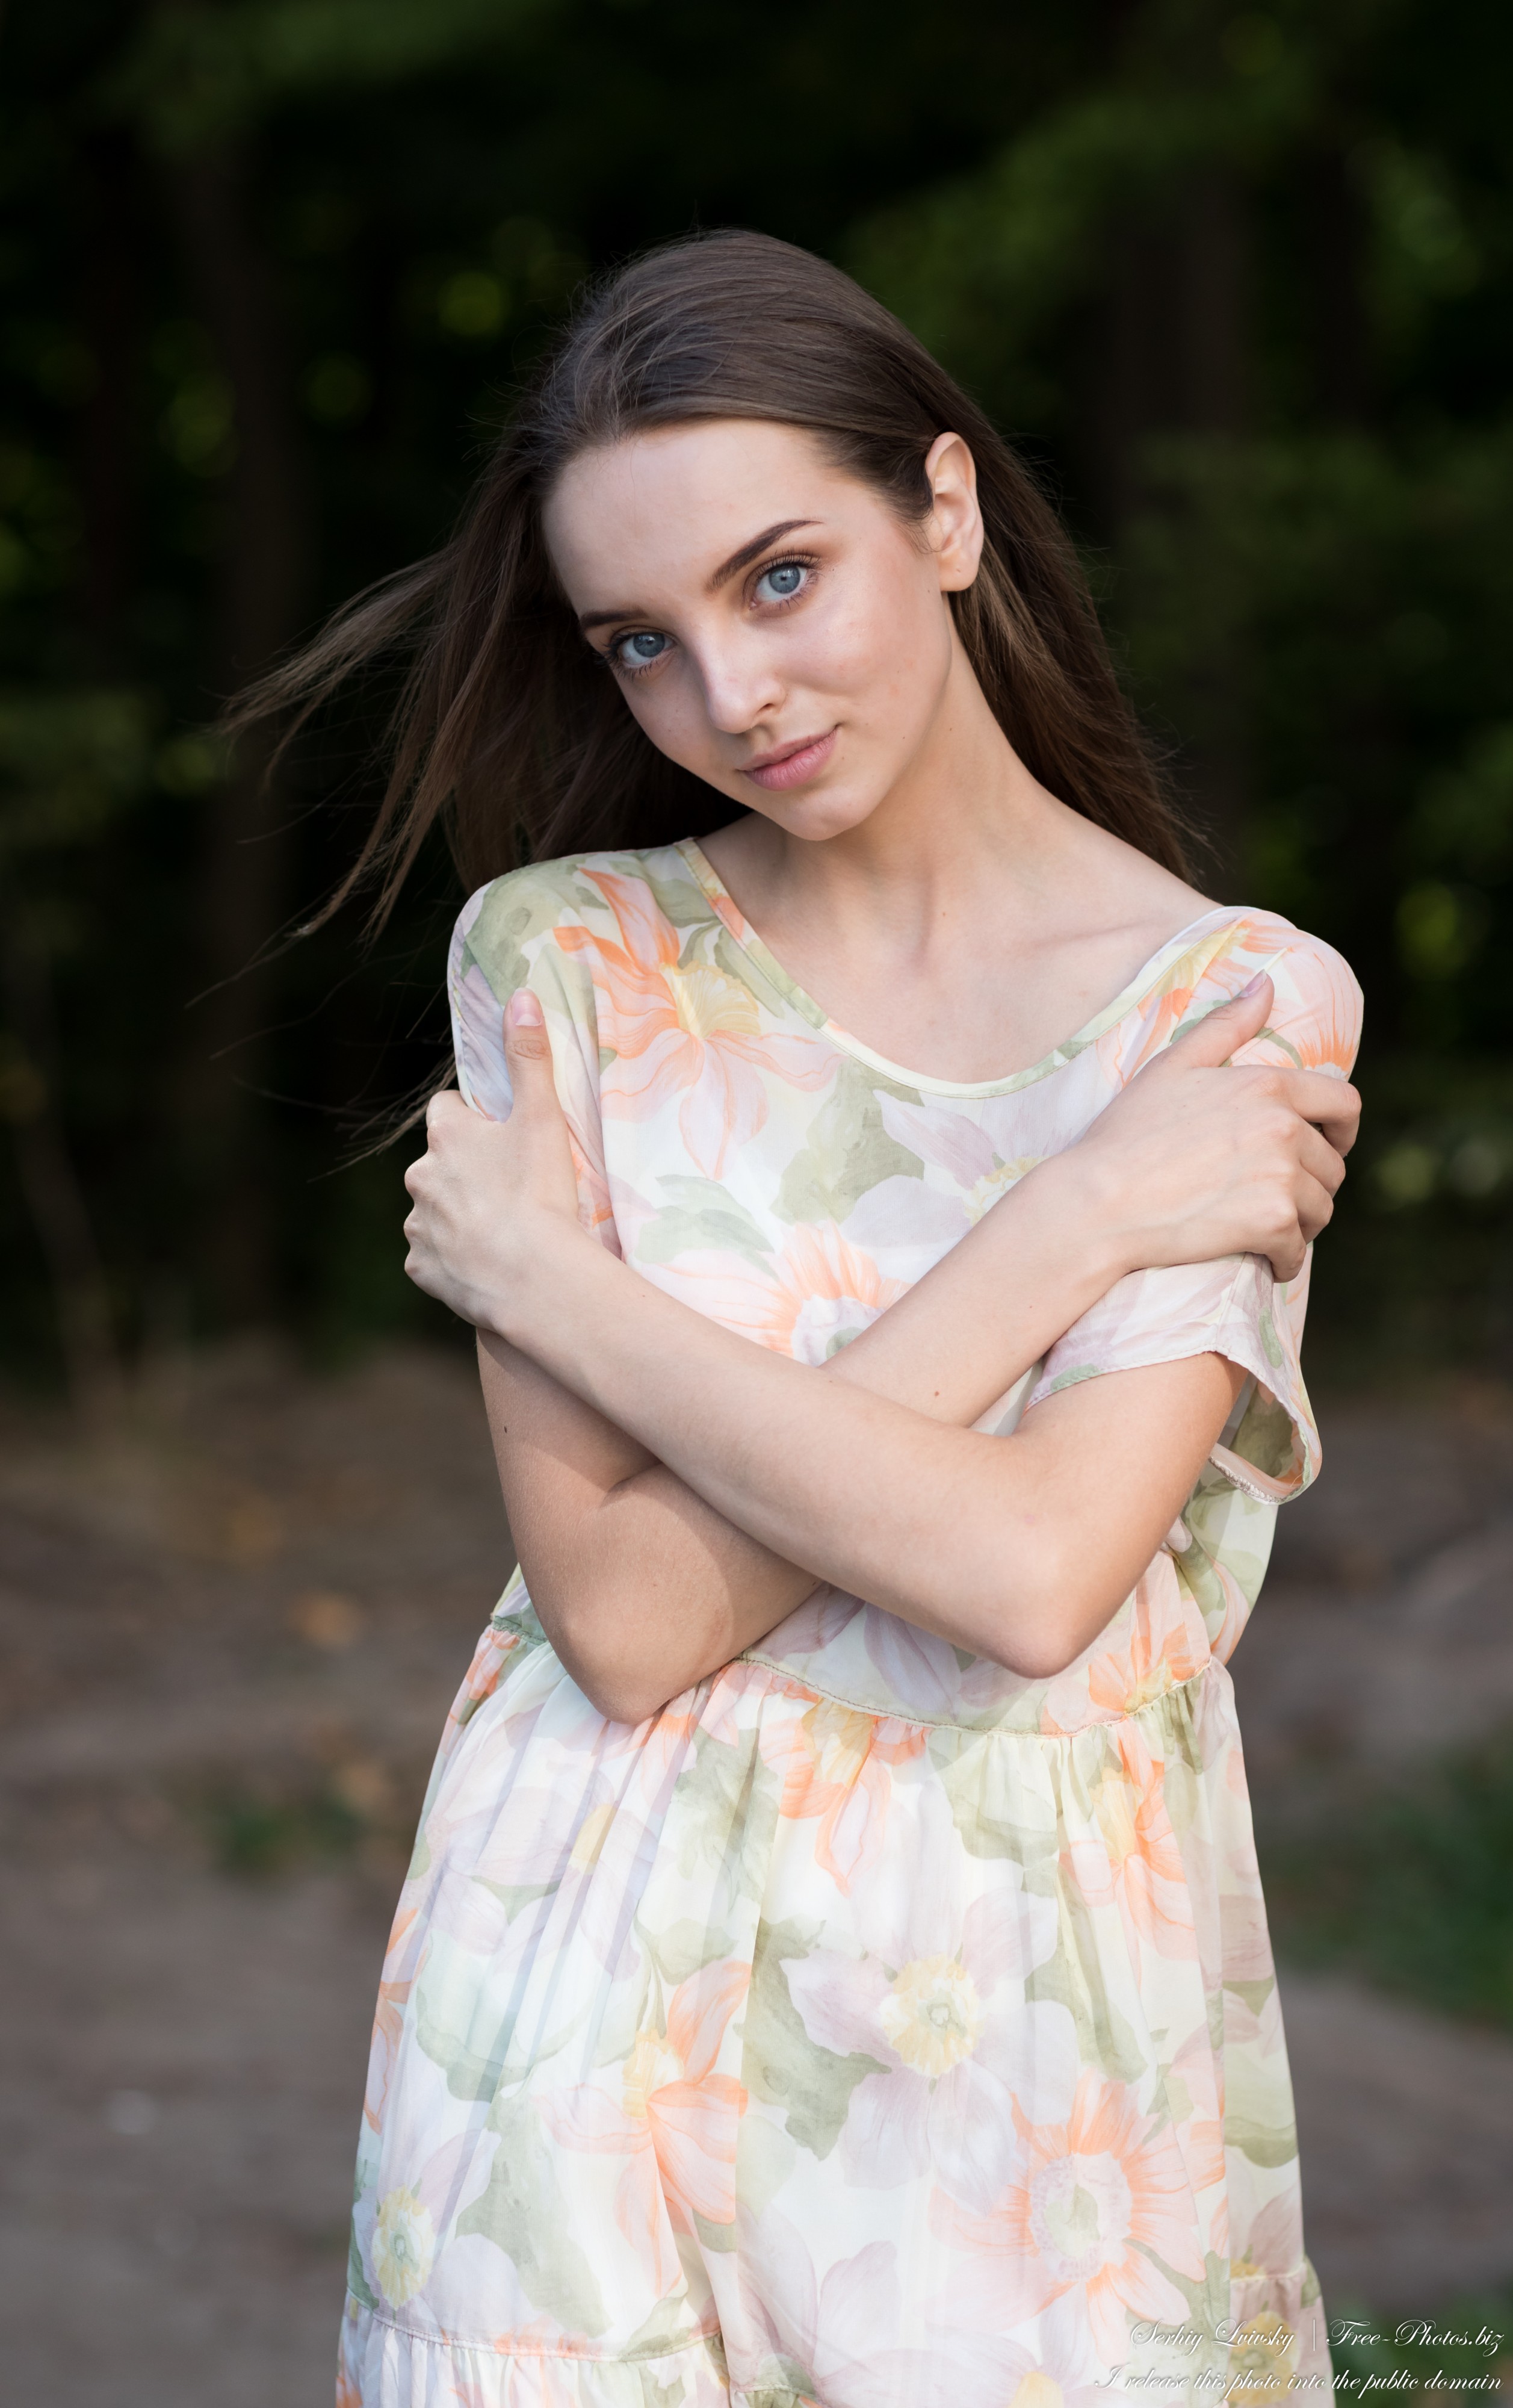 Vika - a 17-year-old brunette girl photographed by Serhiy Lvivsky in September 2020, picture 10